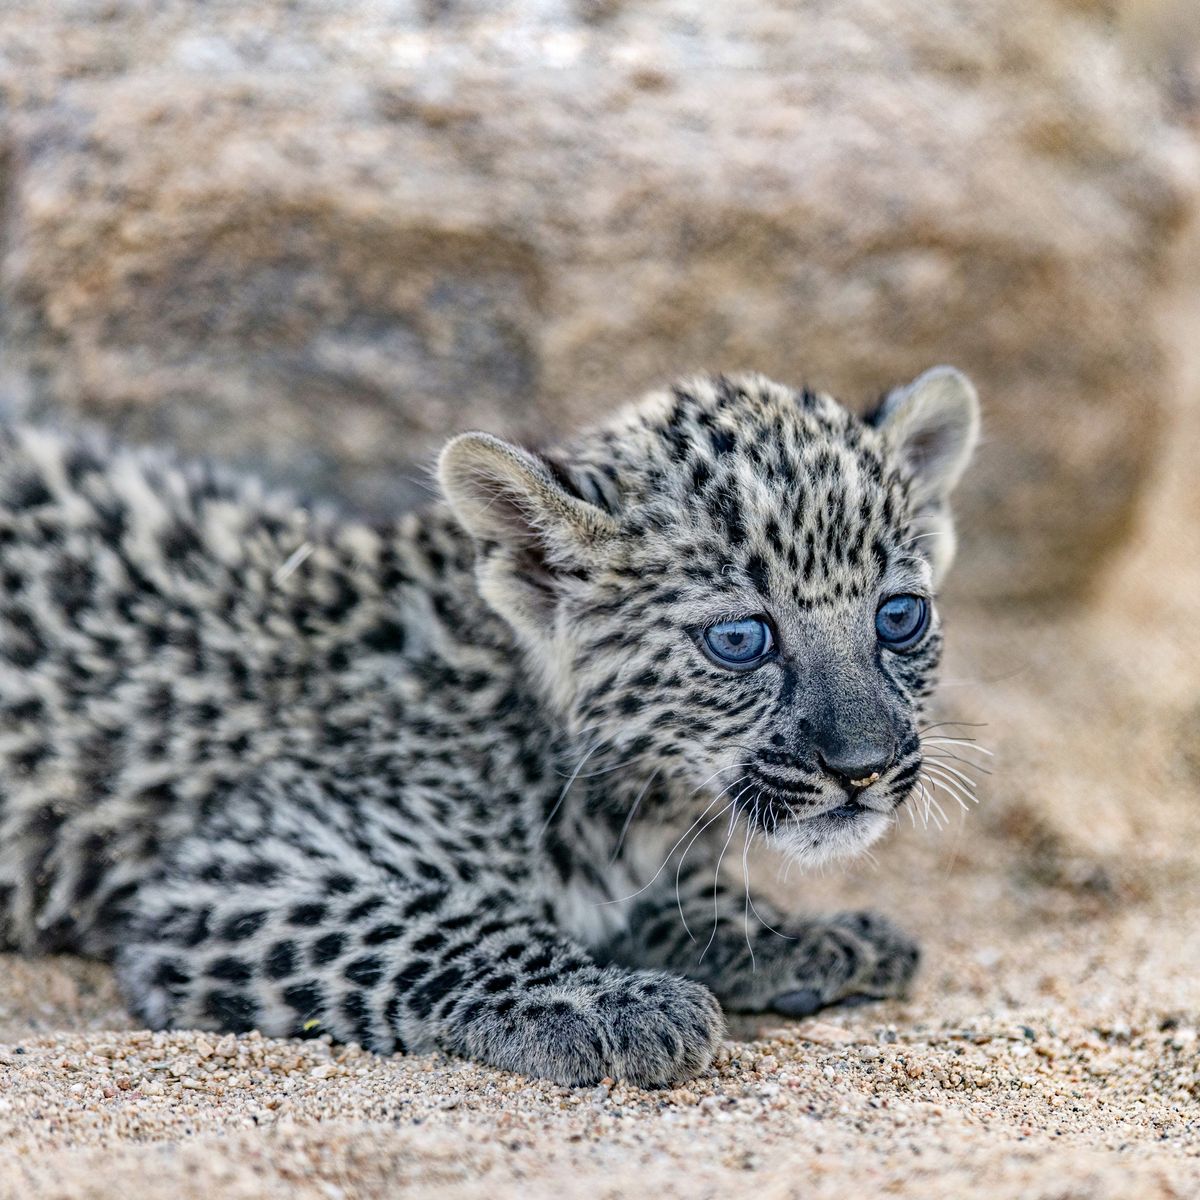 Exciting news from further afield –there is new hope for the #Arabianleopard population! @RCU_SA has shared the success story of 7 adorable cubs born this year as part of their efforts to protect these regal cats &save them from the brink of extinction. #ArabianLeopardCubs #AlUla